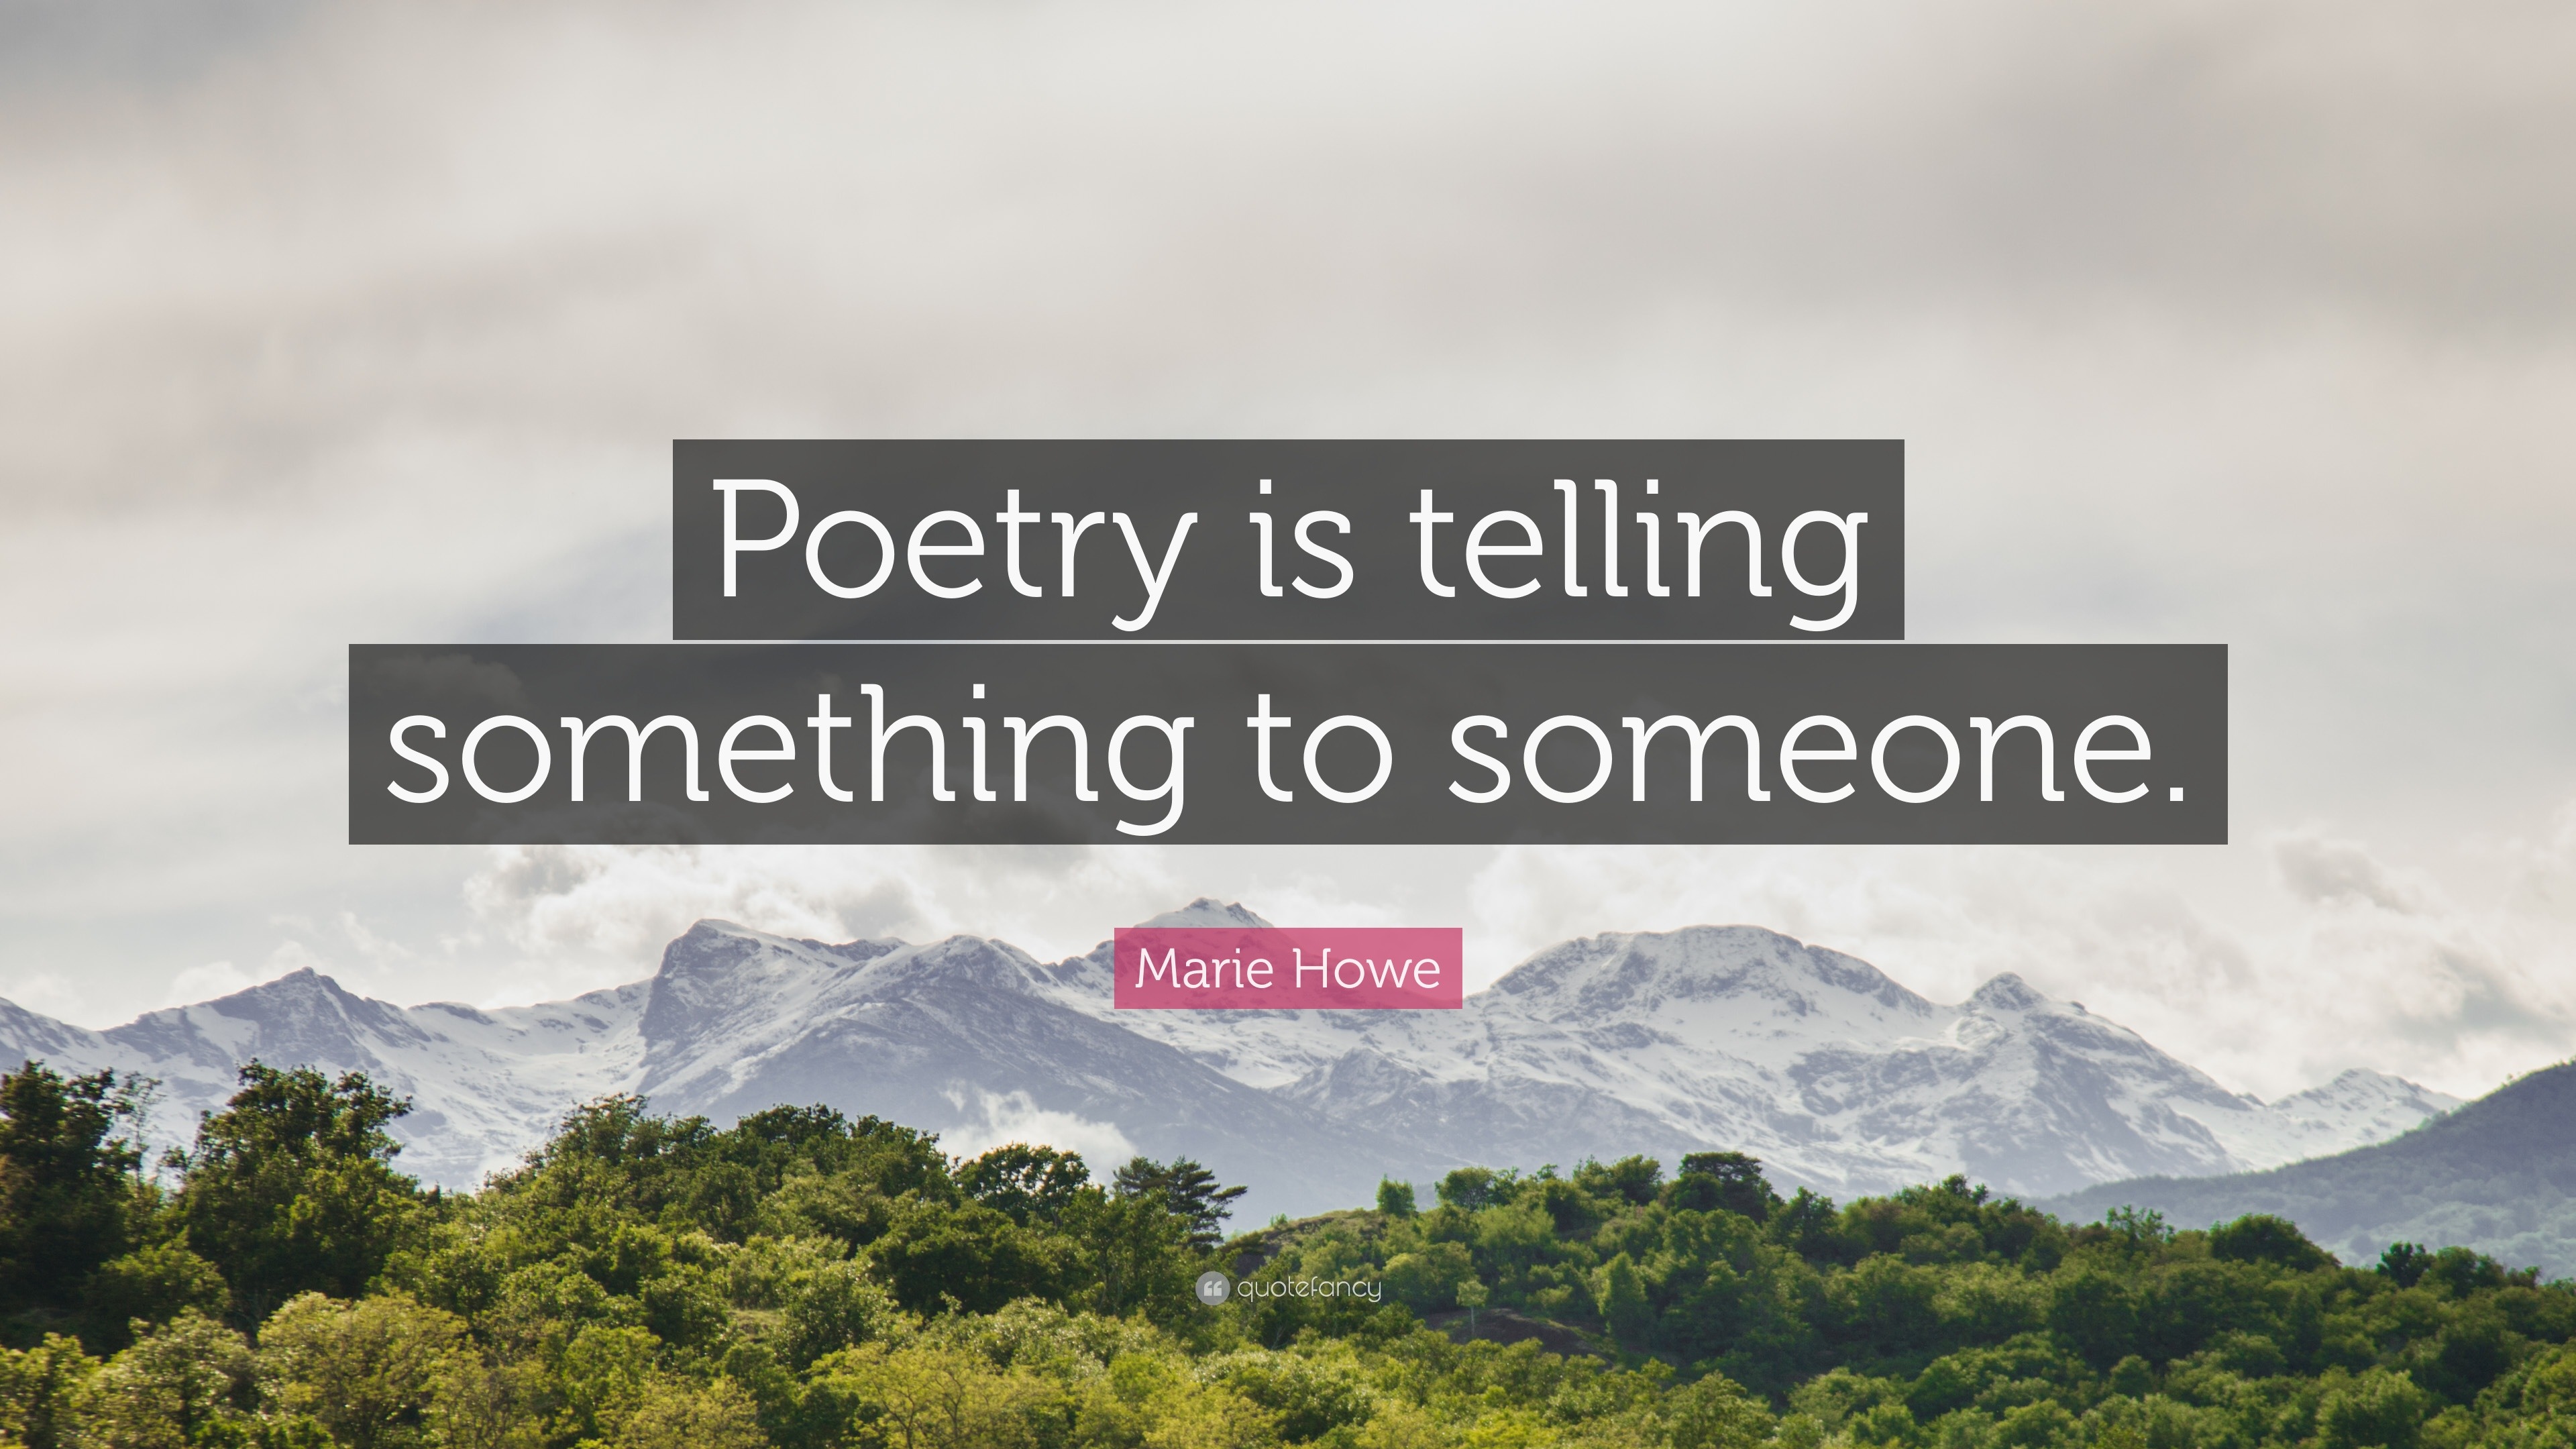 Marie Howe Quote: “Poetry is telling something to someone.”